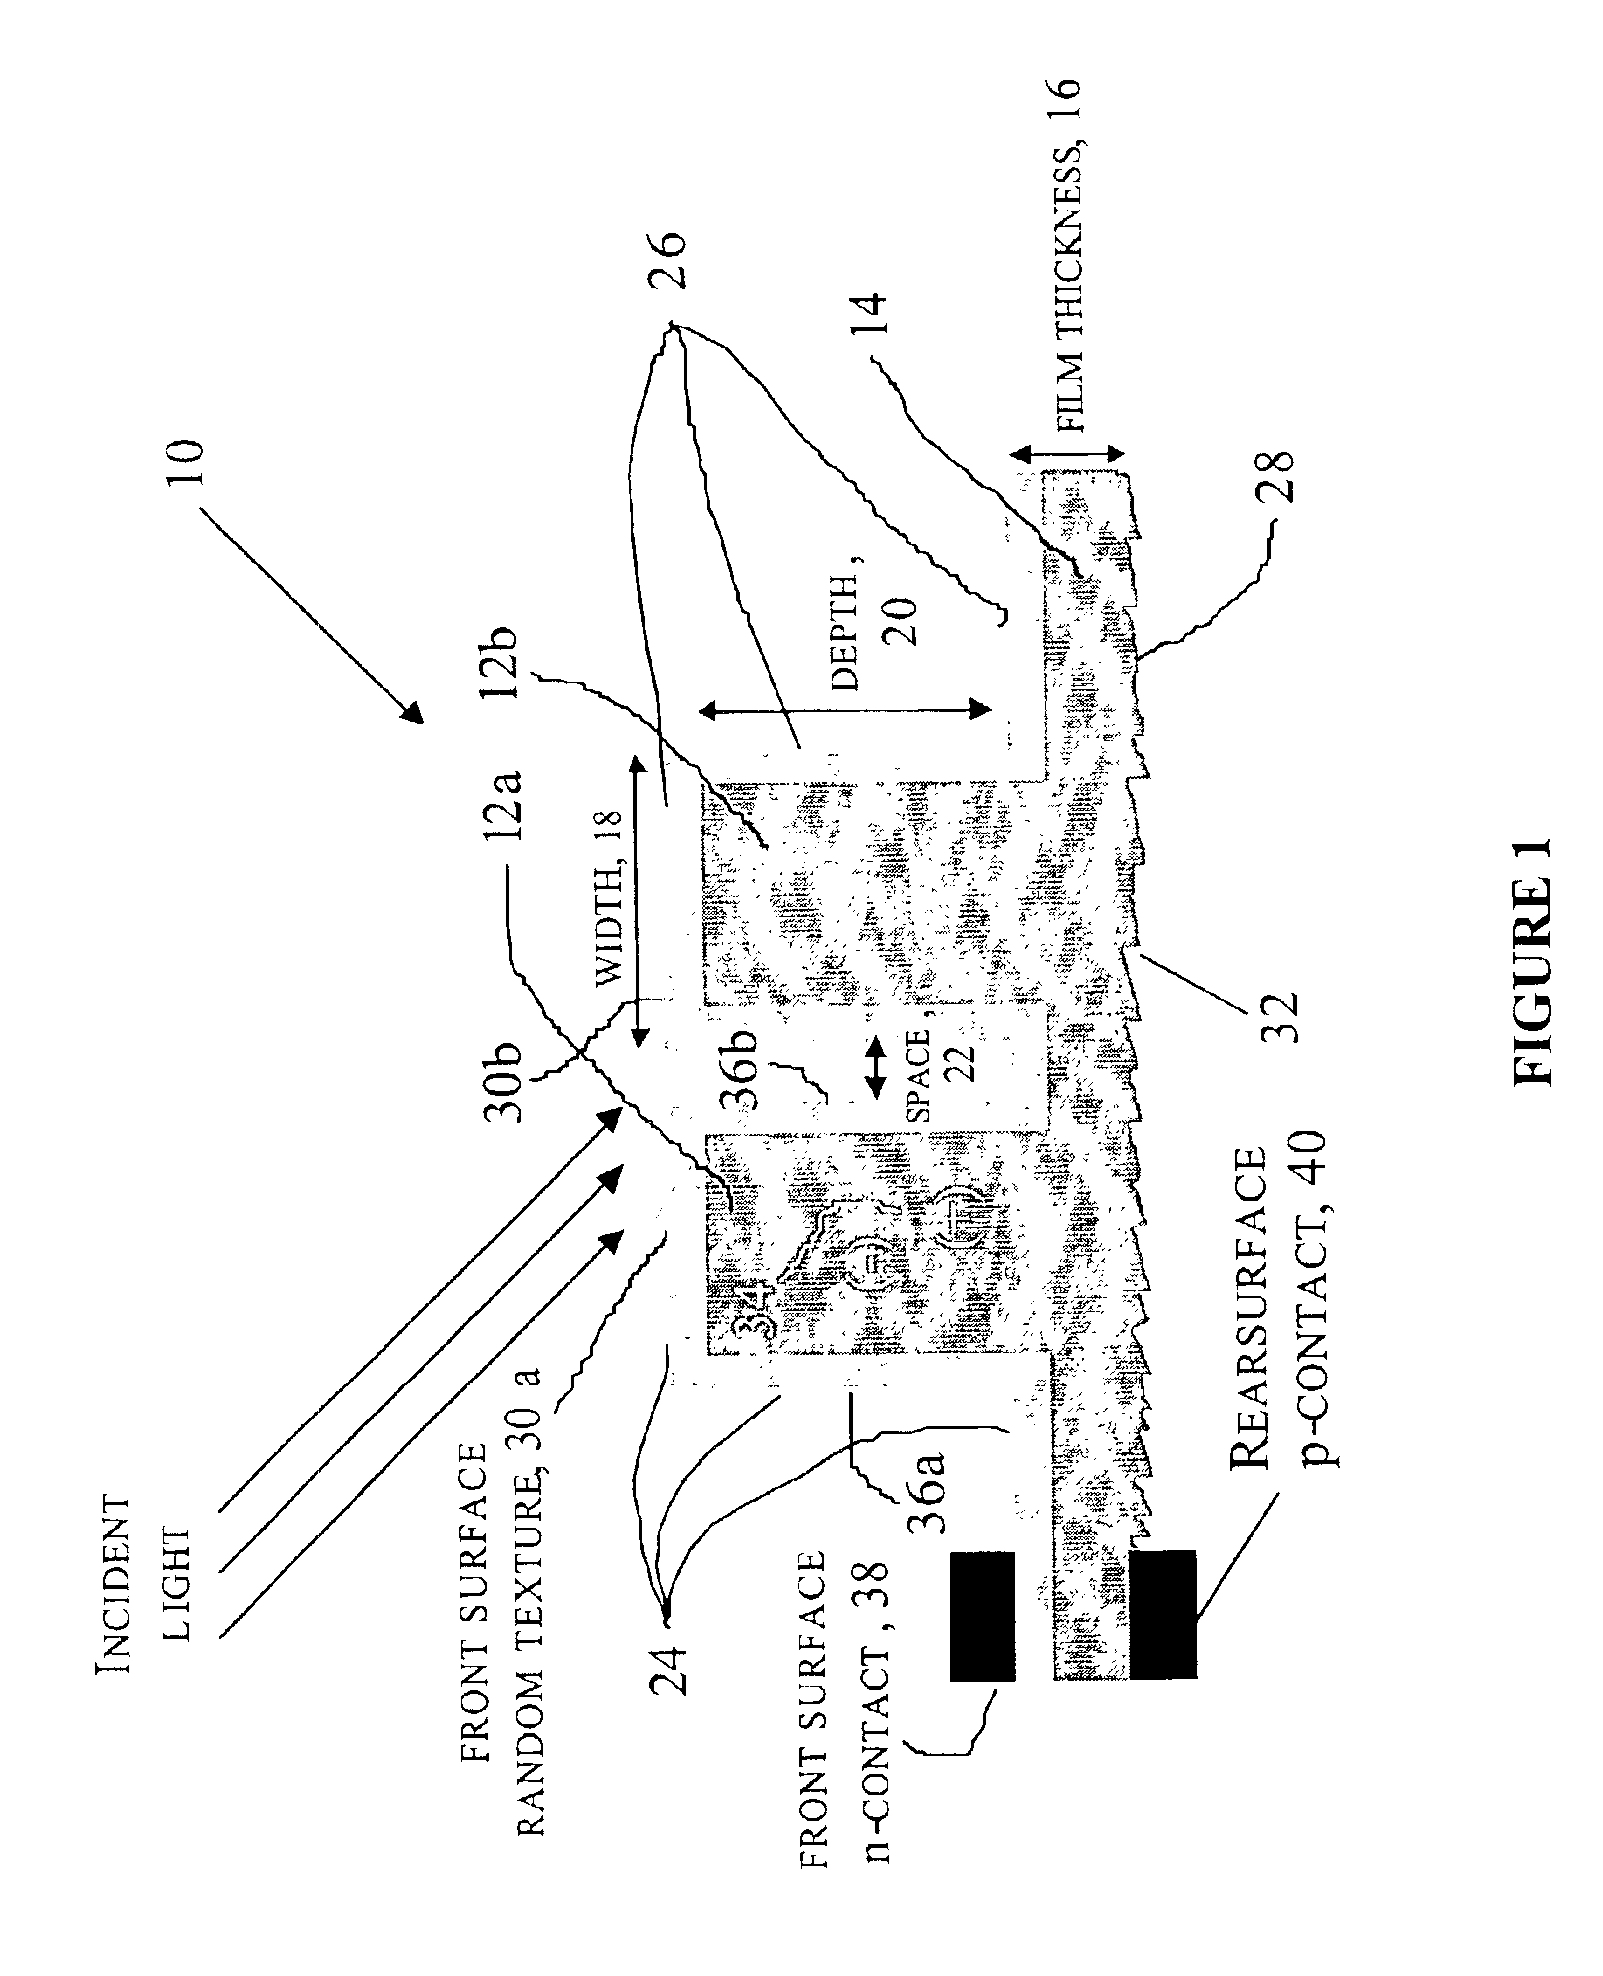 Method of making an enhanced optical absorption and radiation tolerance in thin-film solar cells and photodetectors